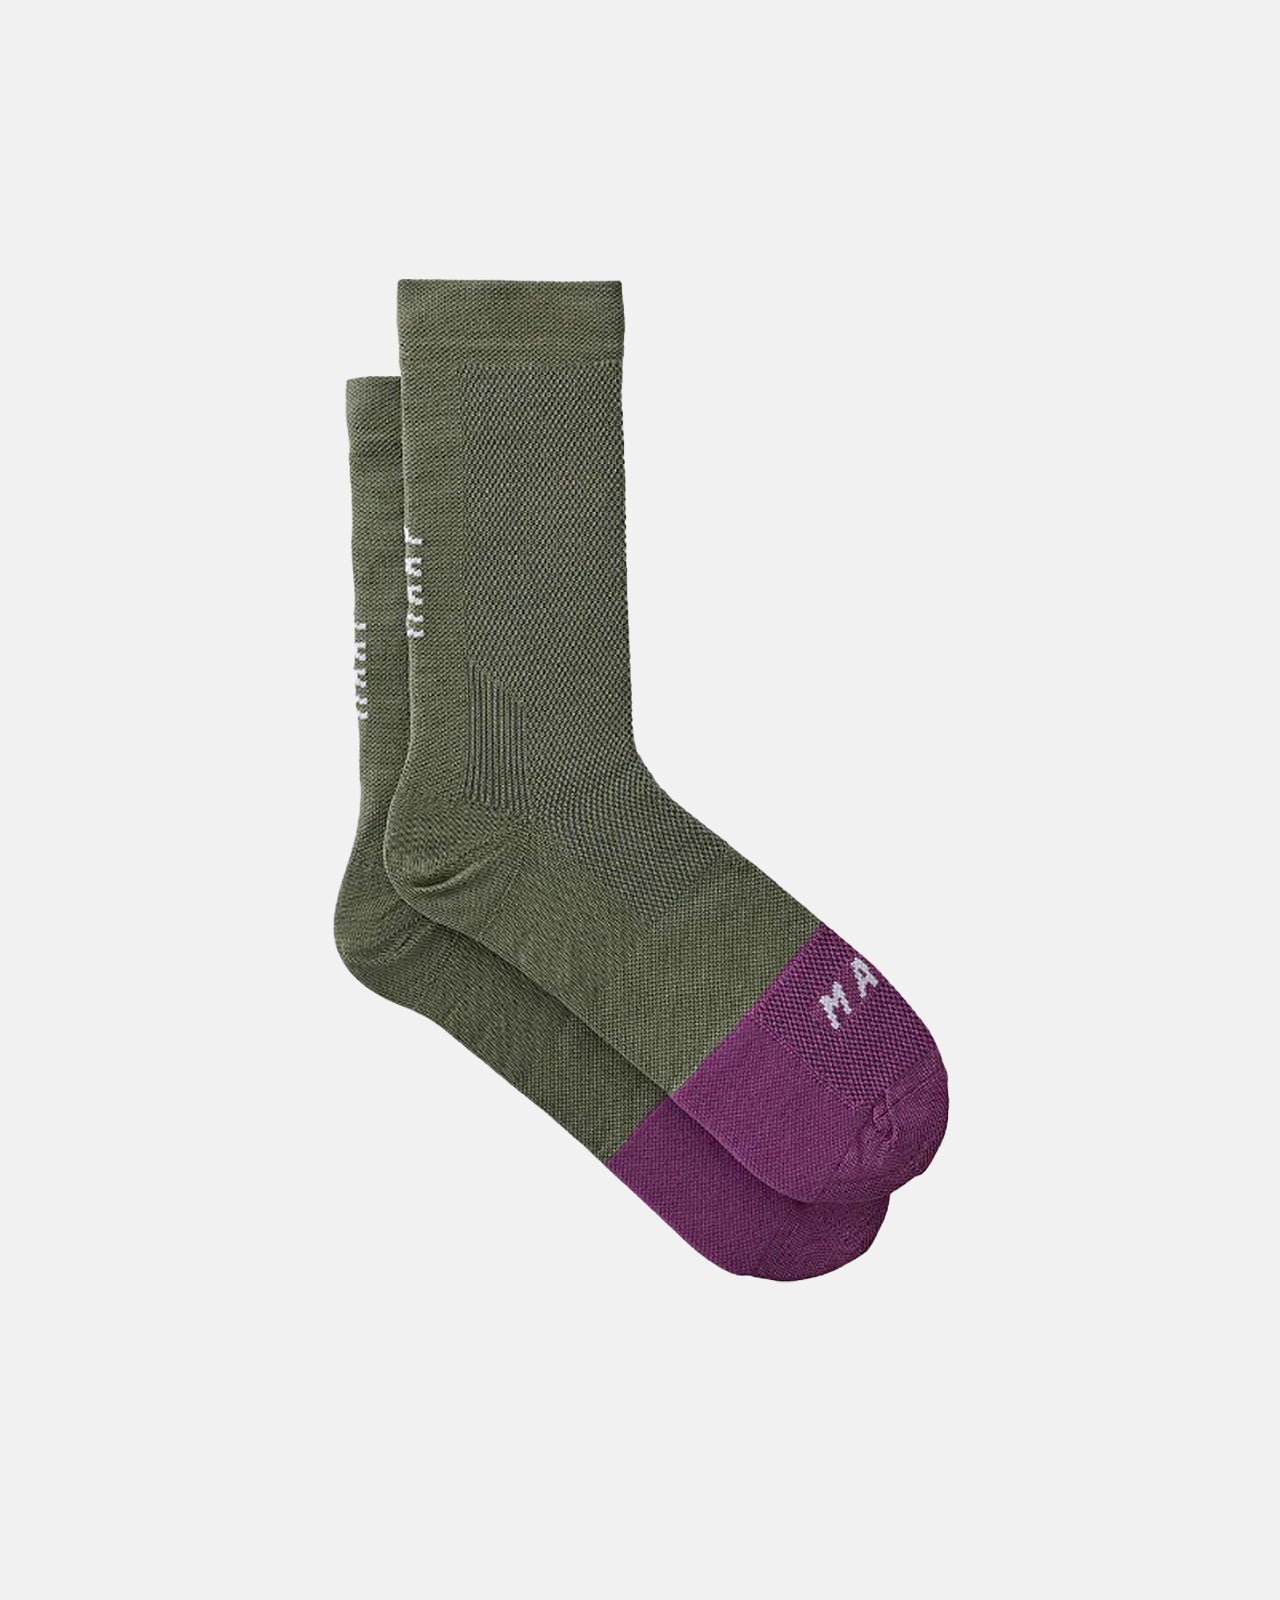 Division Sock - Thyme